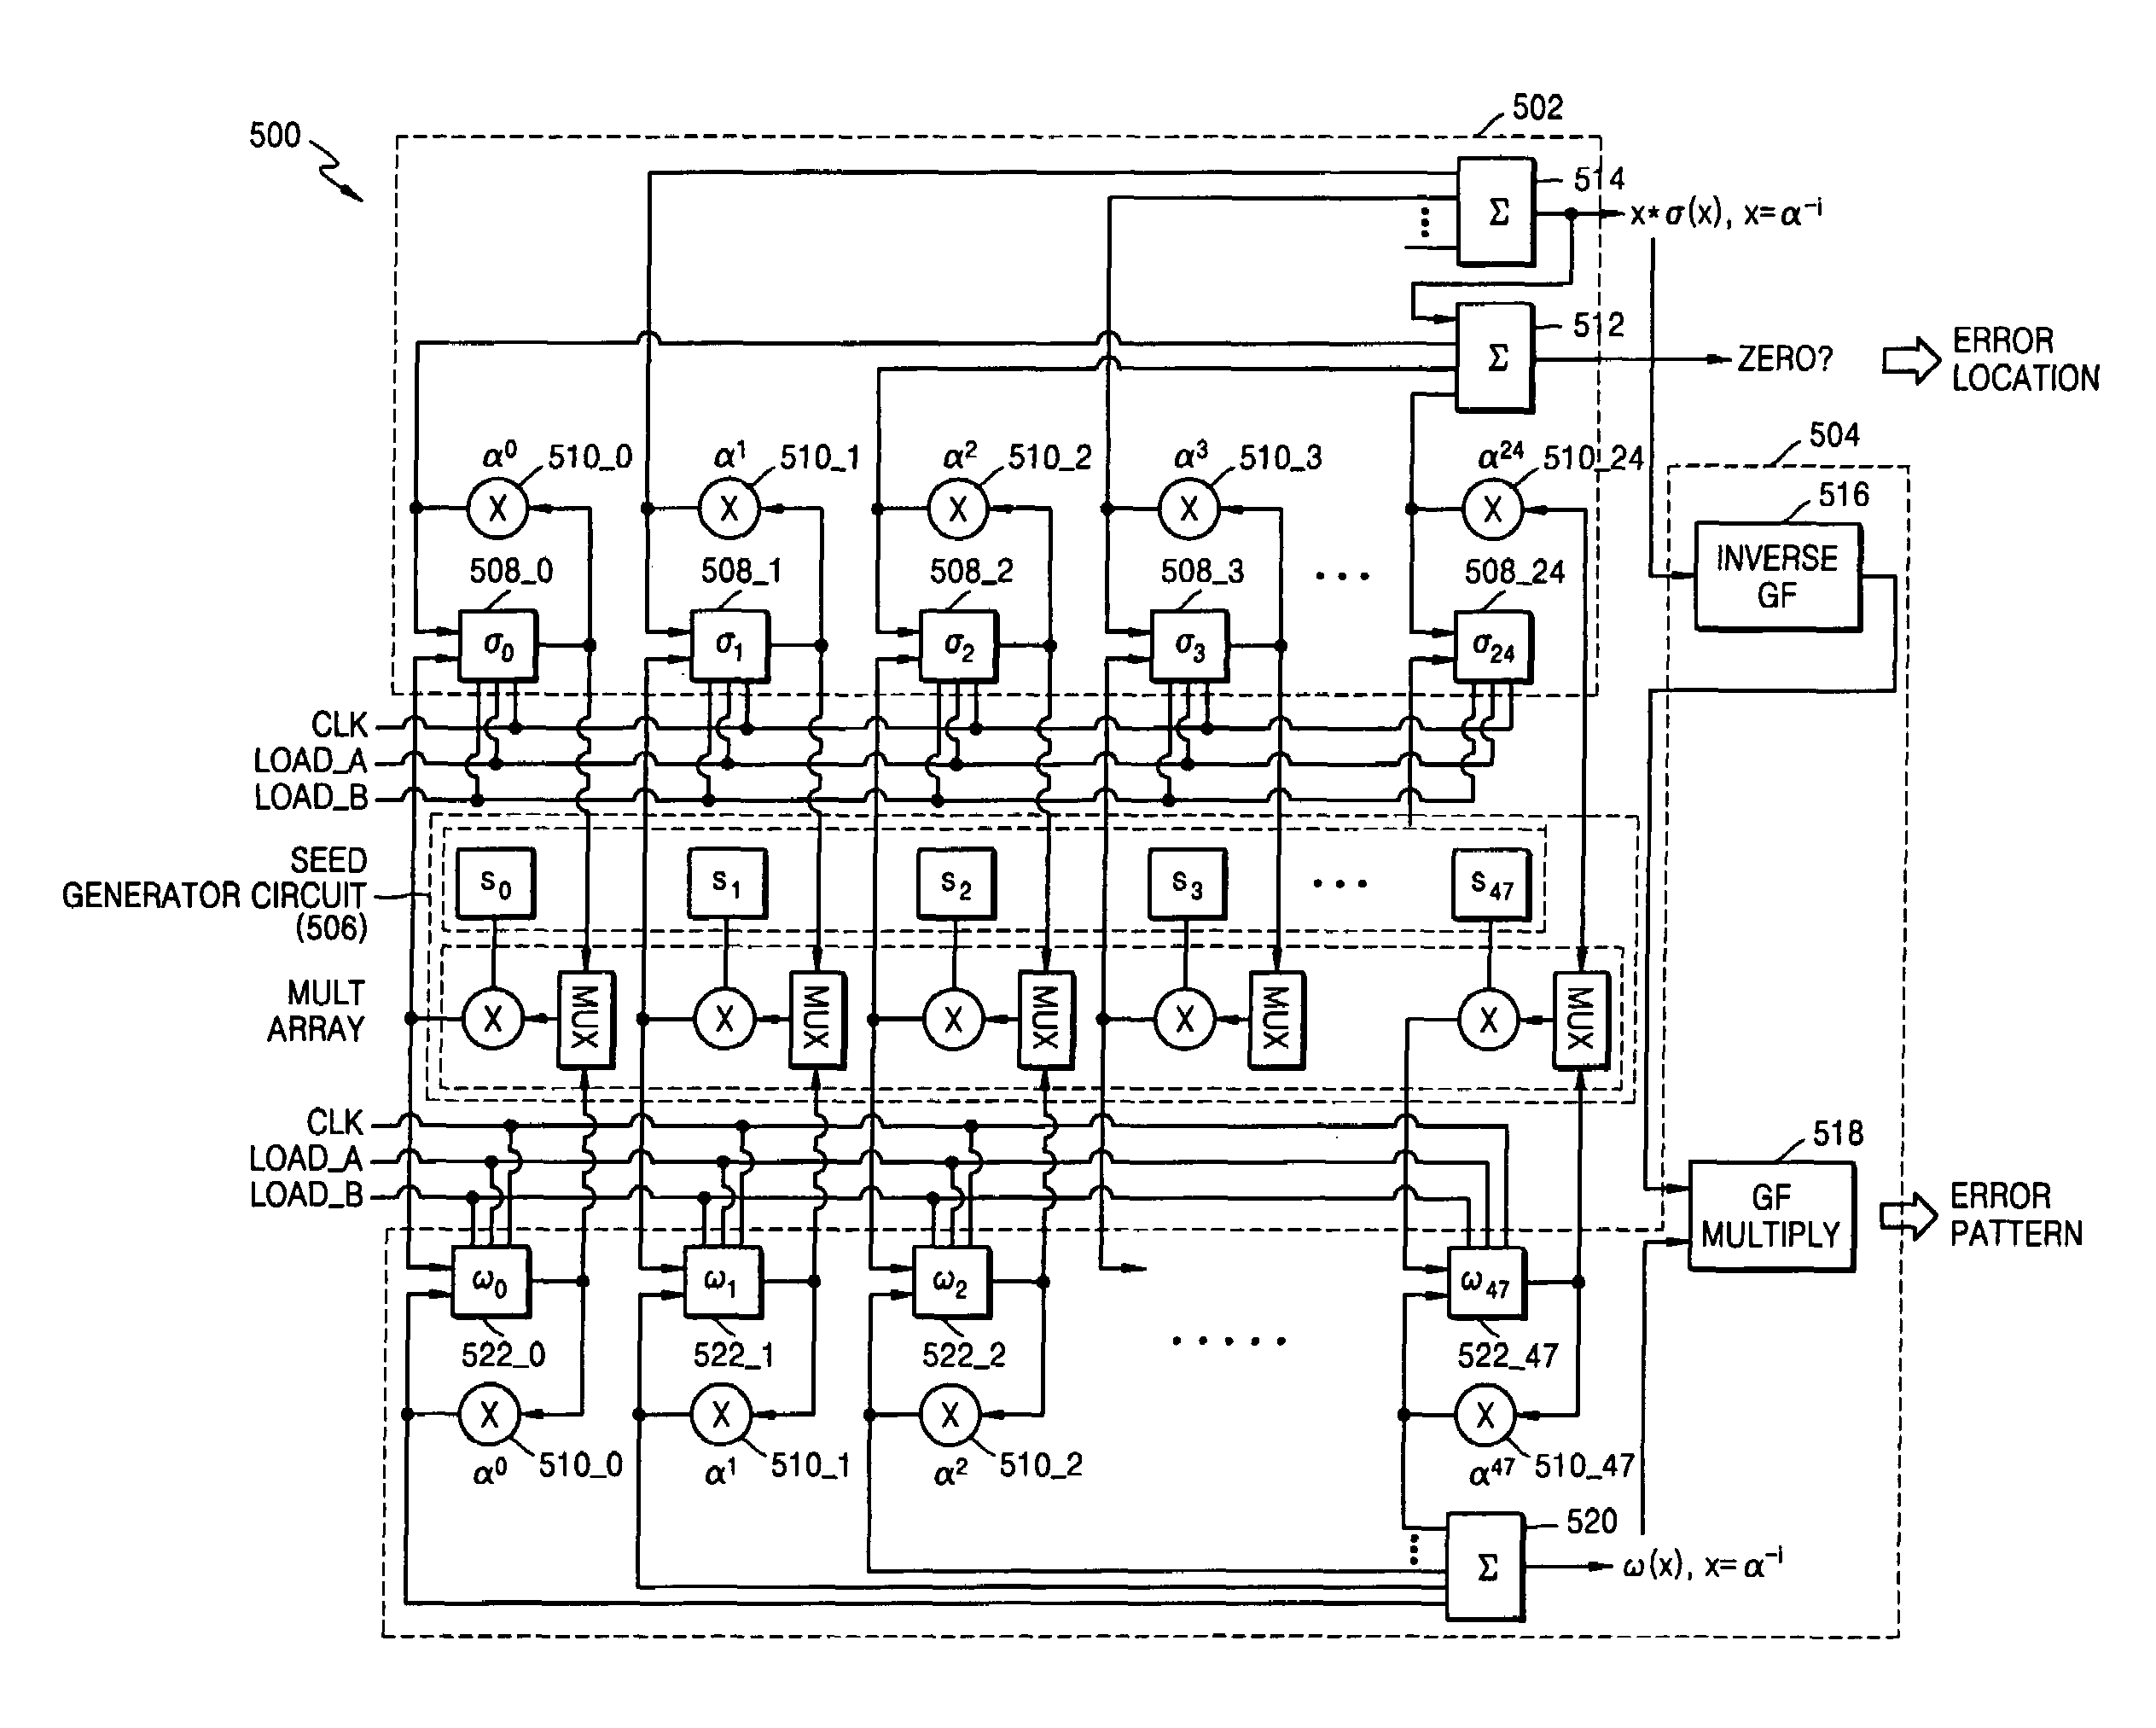 Forward Chien search type Reed-Solomon decoder circuit